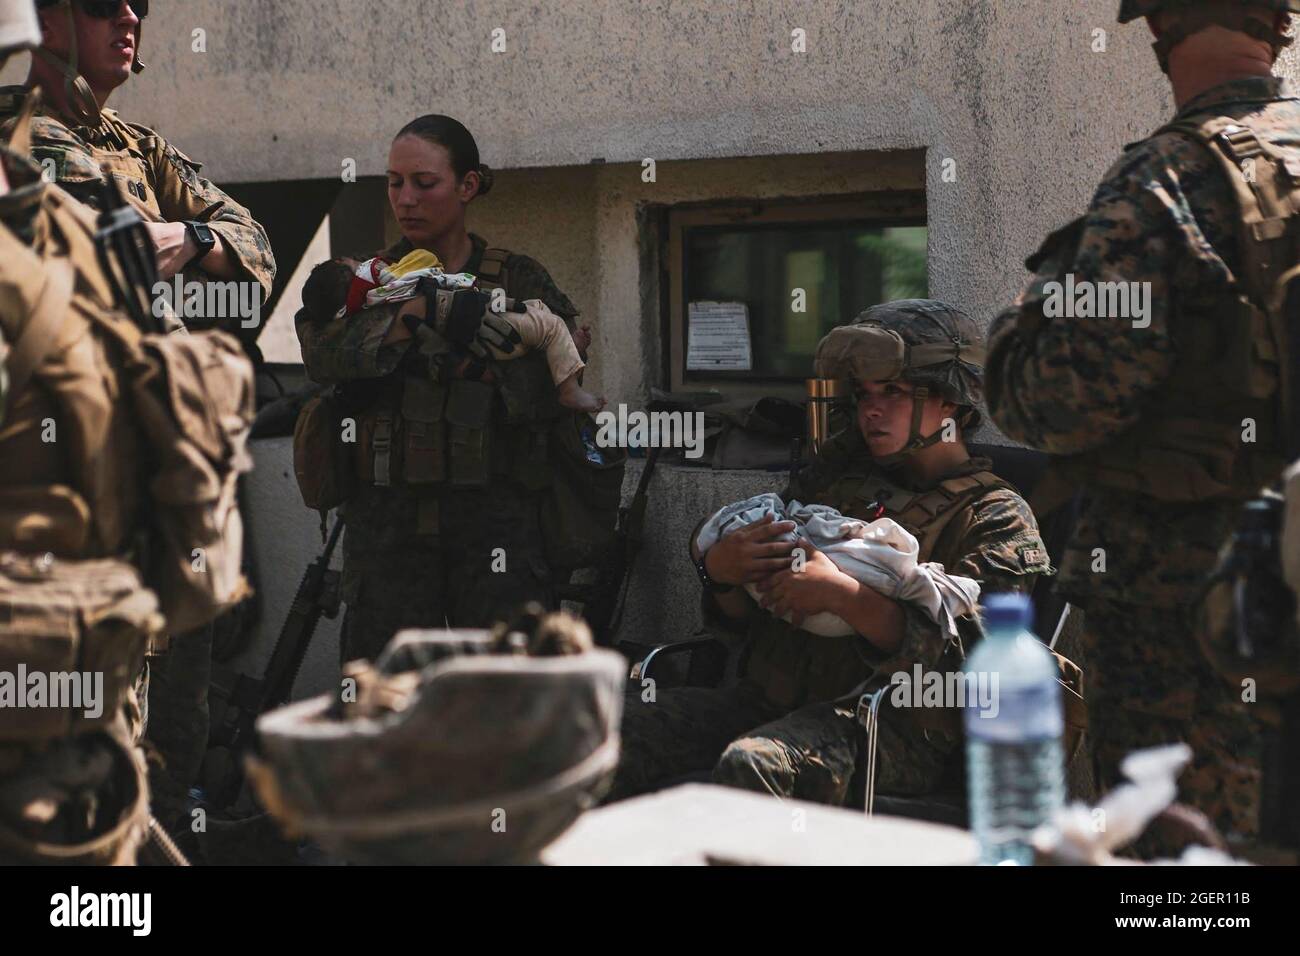 Kabul, Afghanistan. 20th Aug, 2021. US soldiers calm infants during an evacuation at Hamid Karzai International Airport, Kabul, Afghanistan, on August 20, 2021, in the days following the fall of Kabul to Taliban movement, amid chaos and panic scenes at the capitalâÂ€Â™s airport. Photo by CENTCOM-Balkis Press/ABACAPRESS.COM Credit: Abaca Press/Alamy Live News Stock Photo